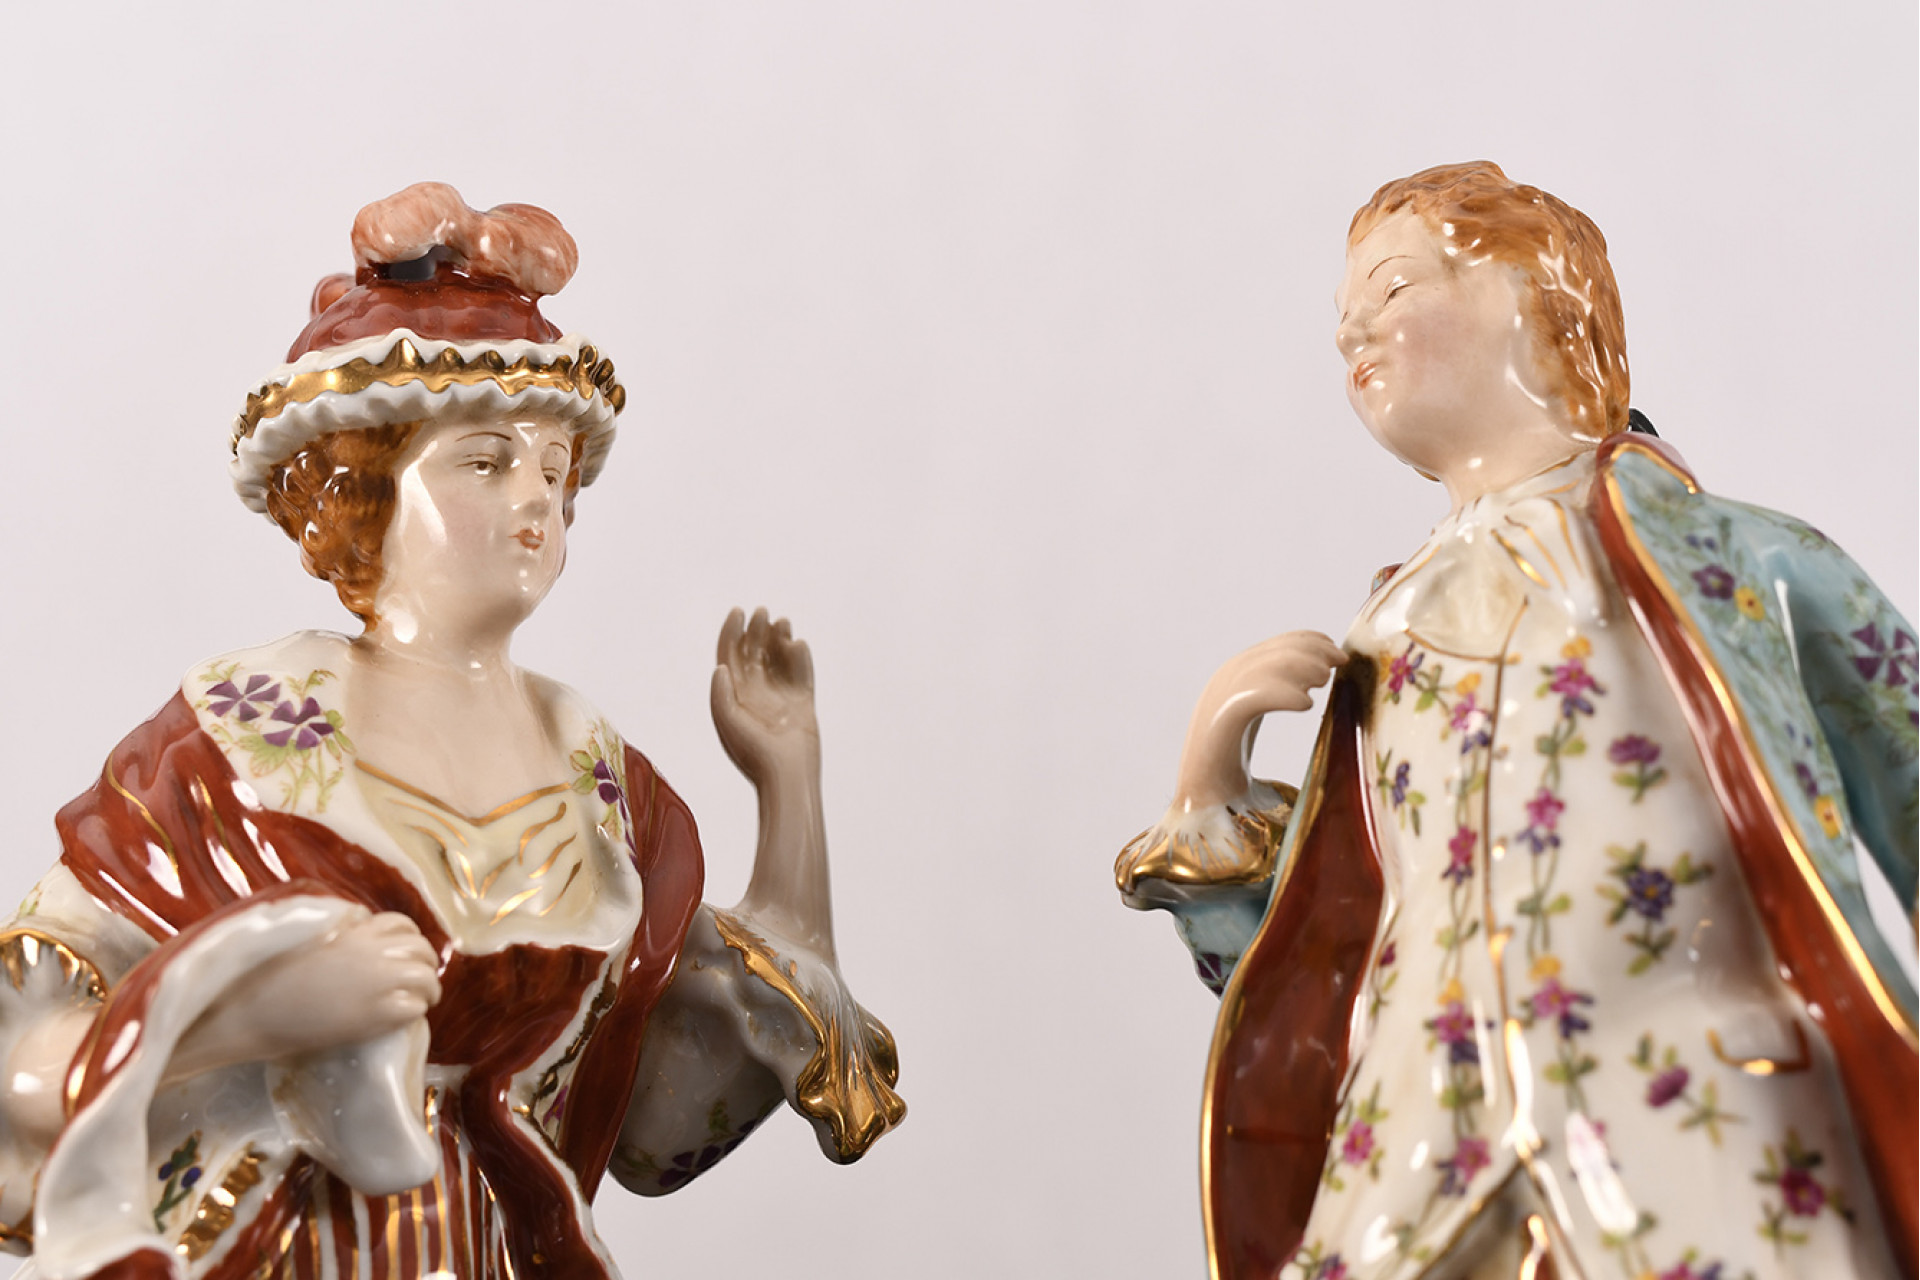 Pair of Hand Painted Porcelain Figures